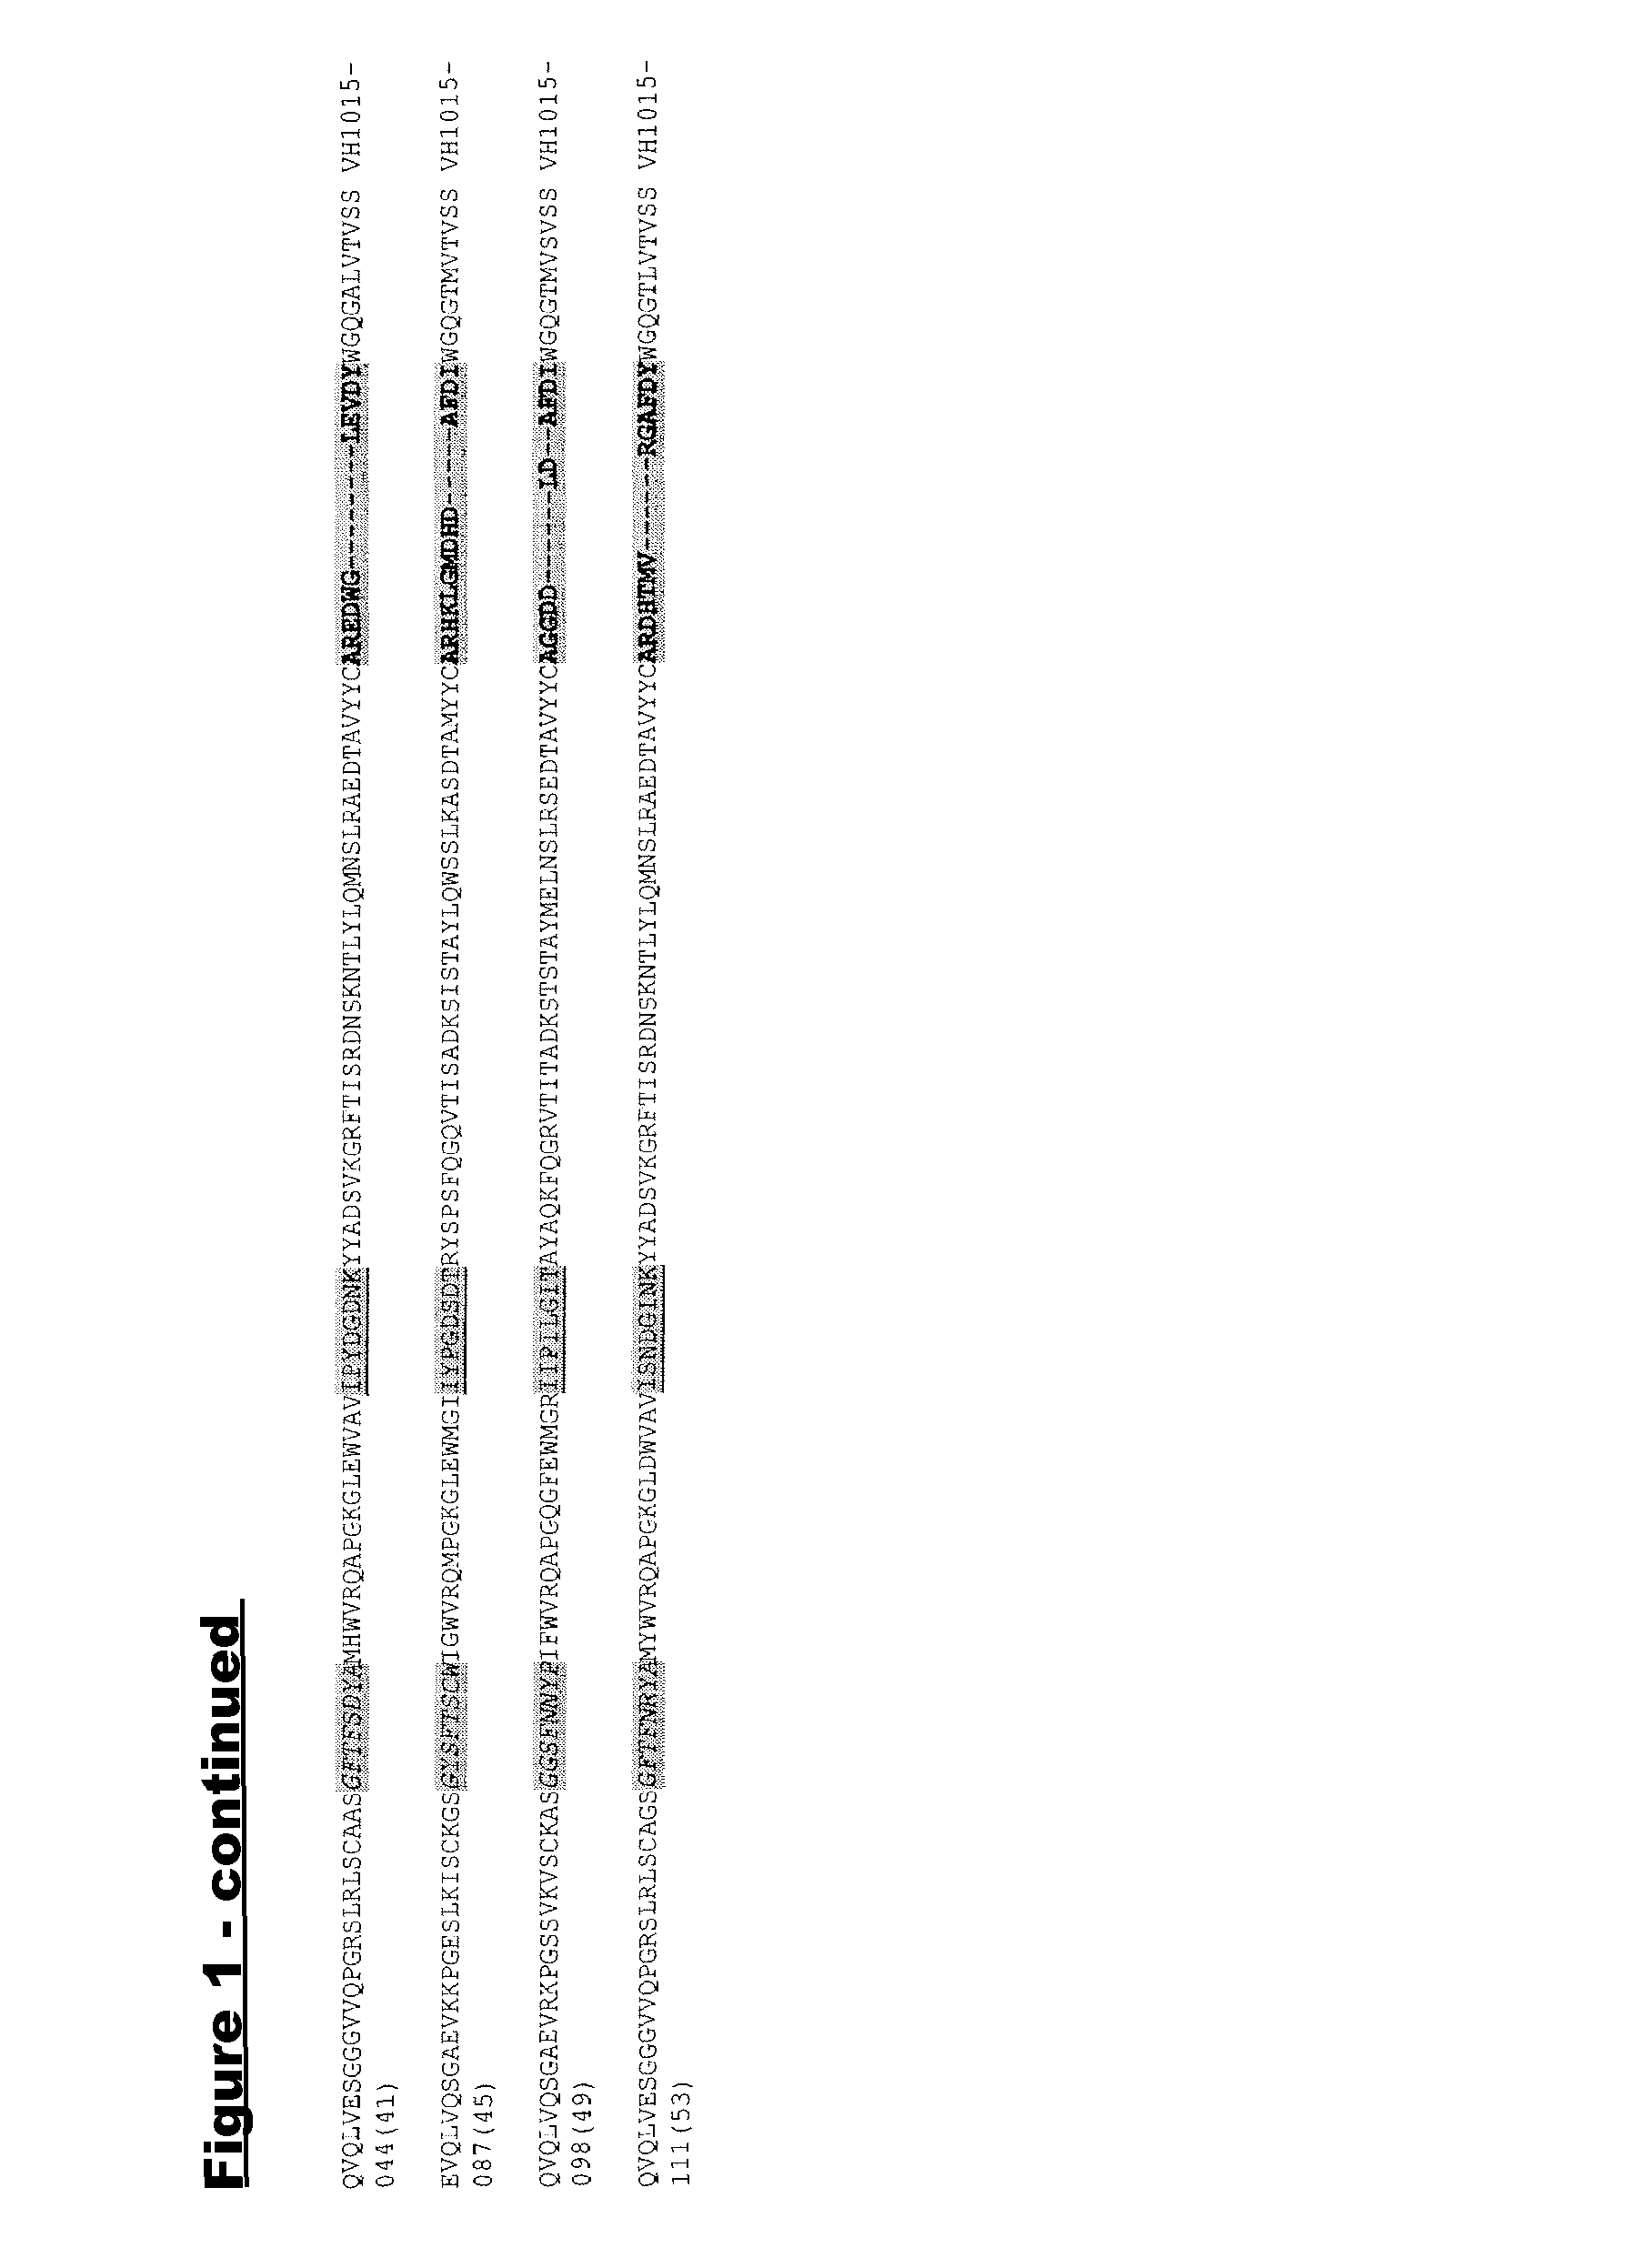 Human antibodies against tissue factor and methods of use thereof